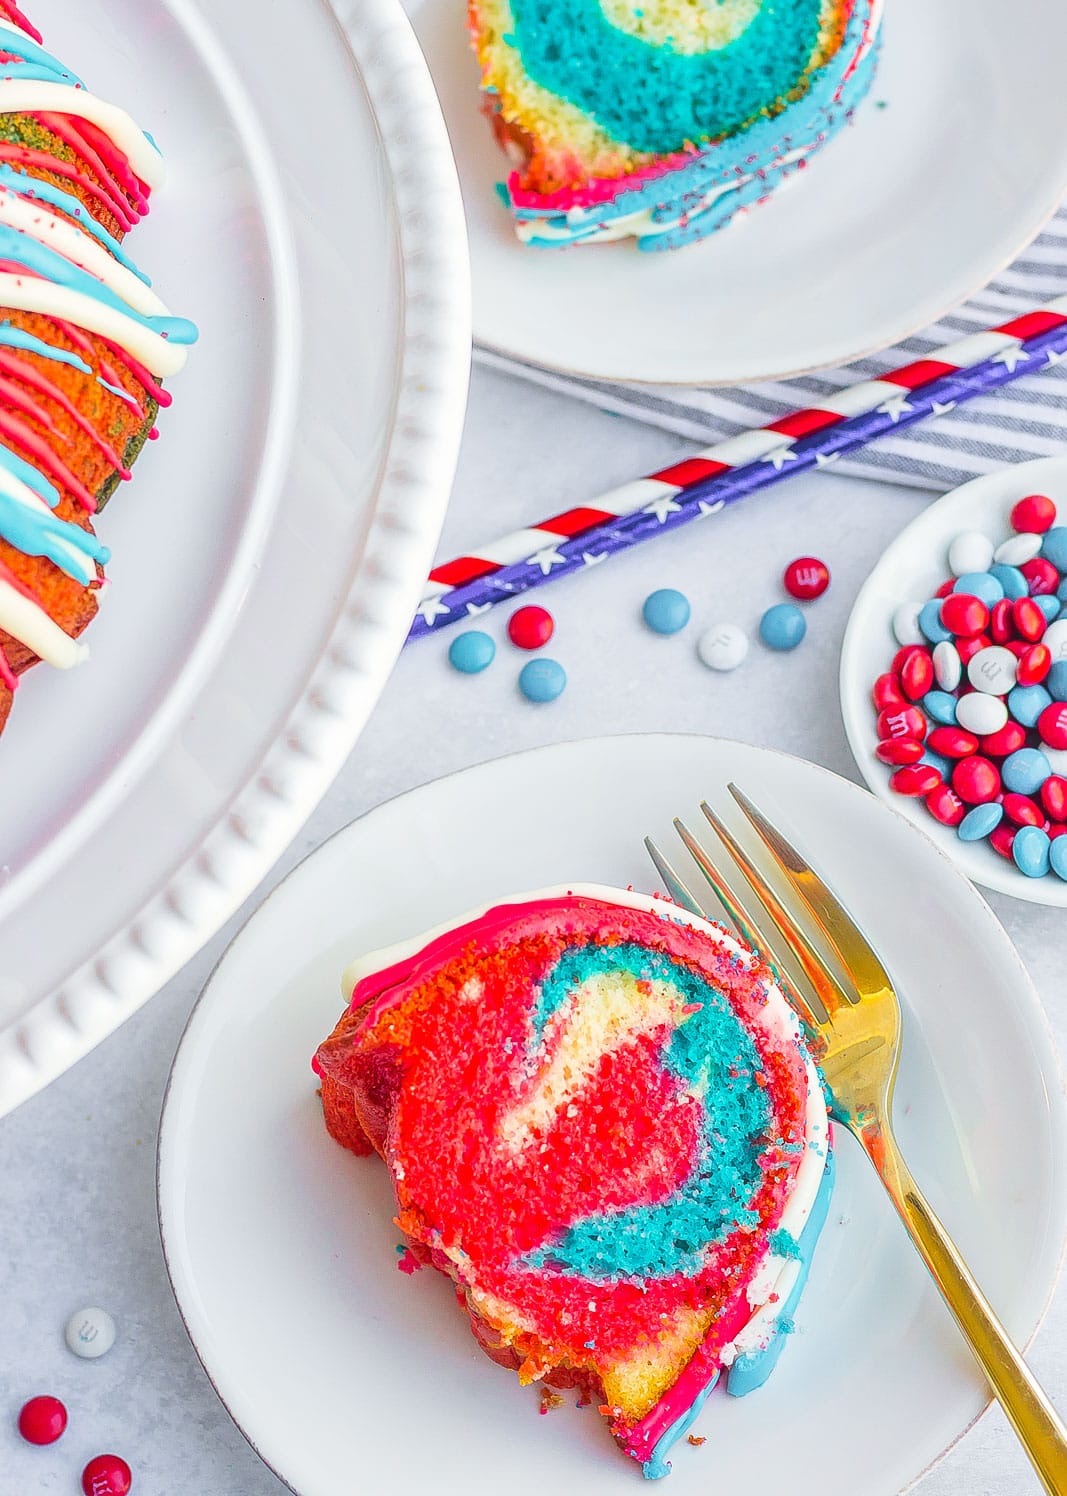 red, white, and blue bundt cake slice with fork